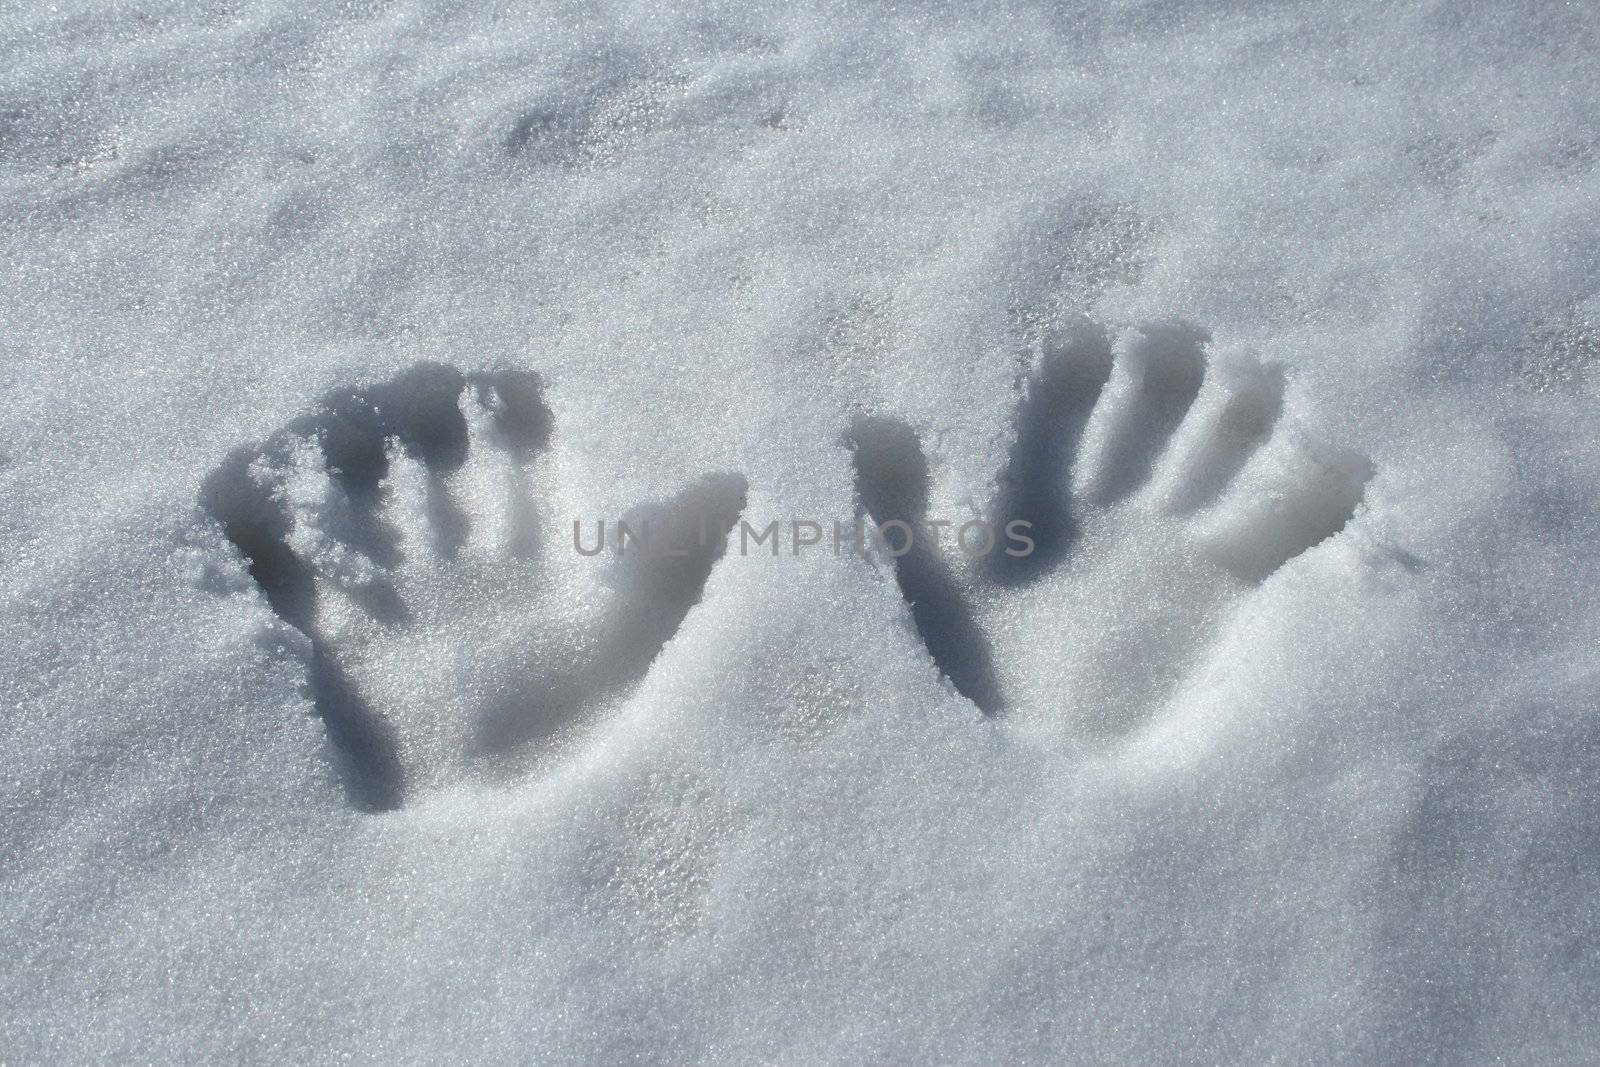 Handprints in the snow by anikasalsera